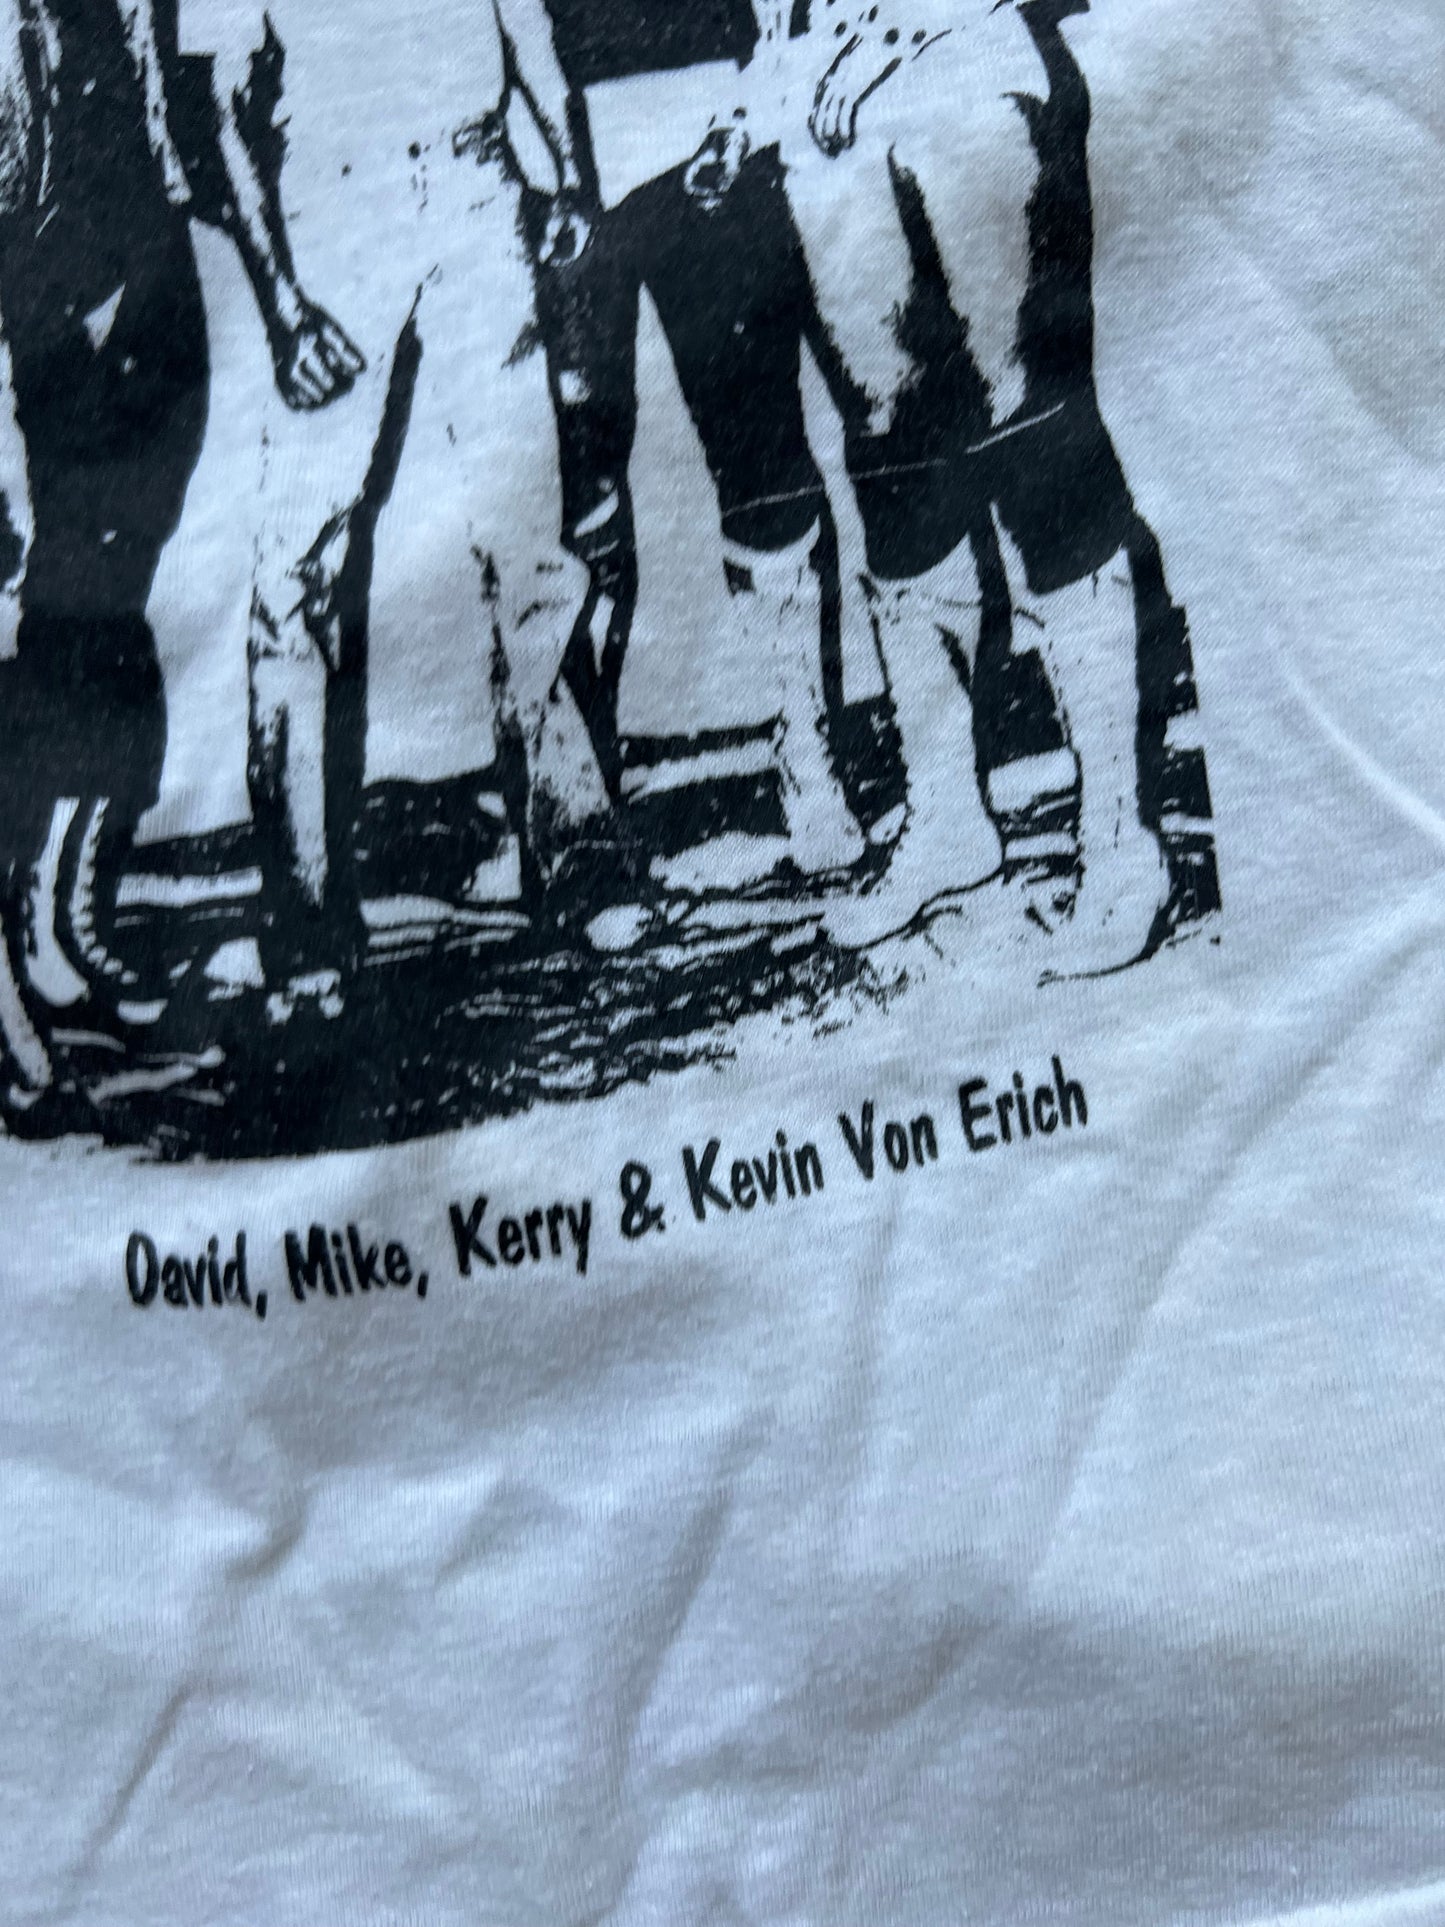 1983 WCCW Von Erich sleeveless shirt featuring Kerry, Mike, David and Kevin